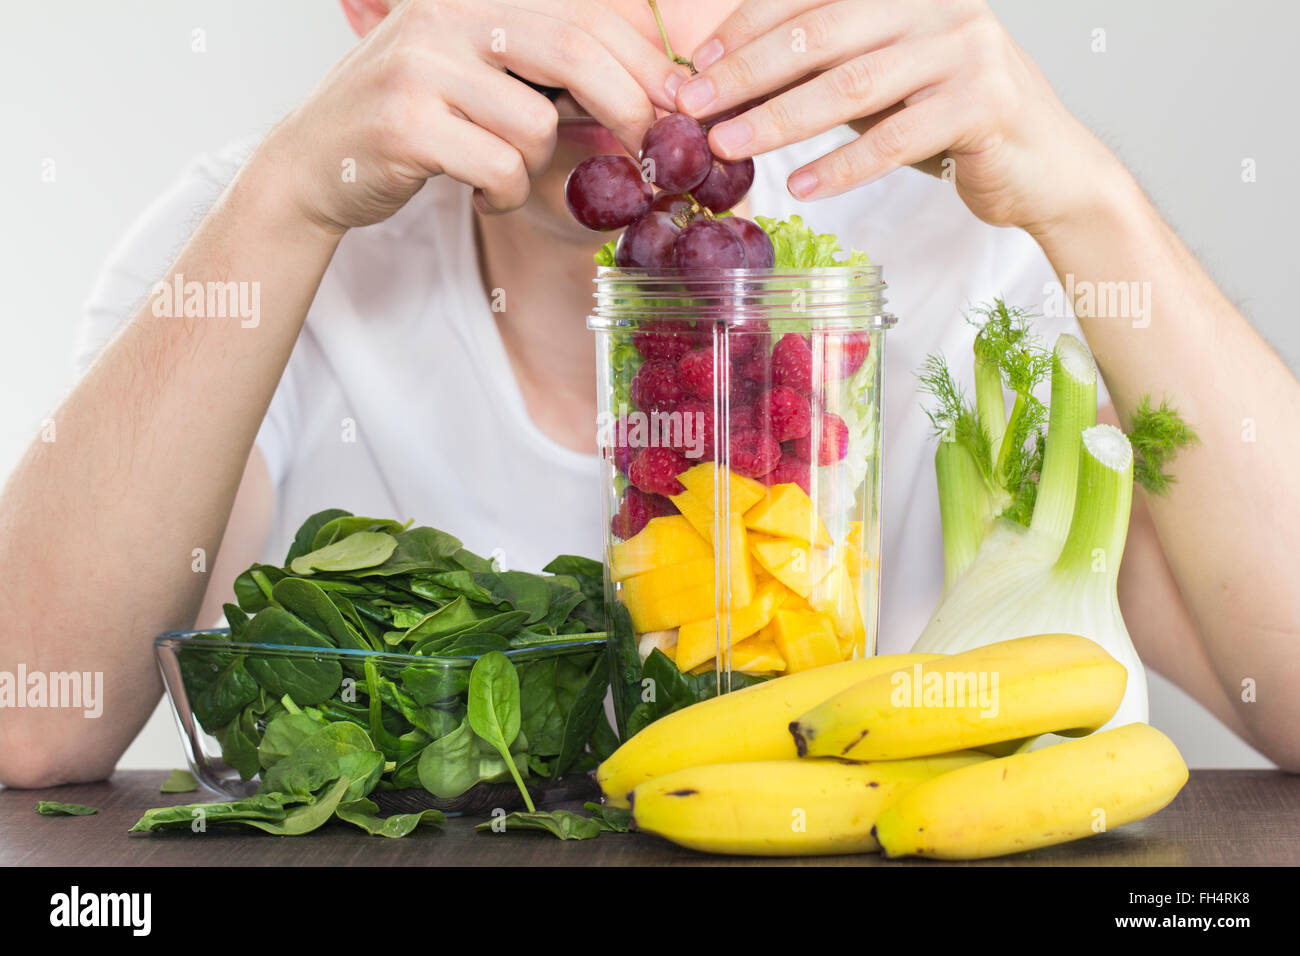 man eating fruits and vegetables healthy eating concept Stock Photo